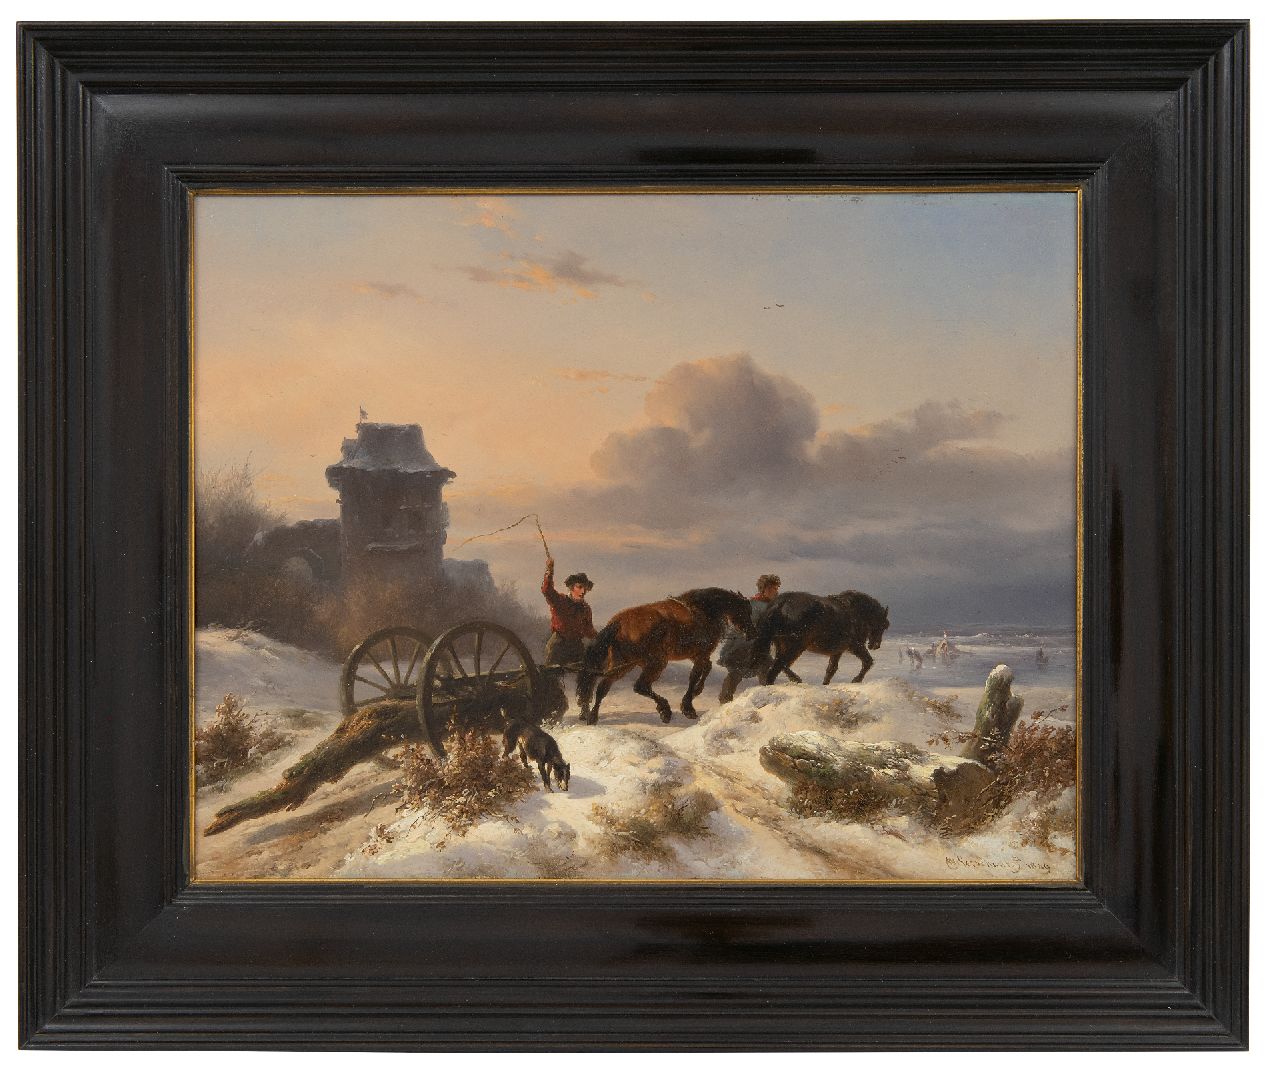 Verschuur W.  | Wouterus Verschuur | Paintings offered for sale | Carters with mallejan in a winter landscape, oil on panel 27.2 x 35.0 cm, signed l.r. and dated 1849